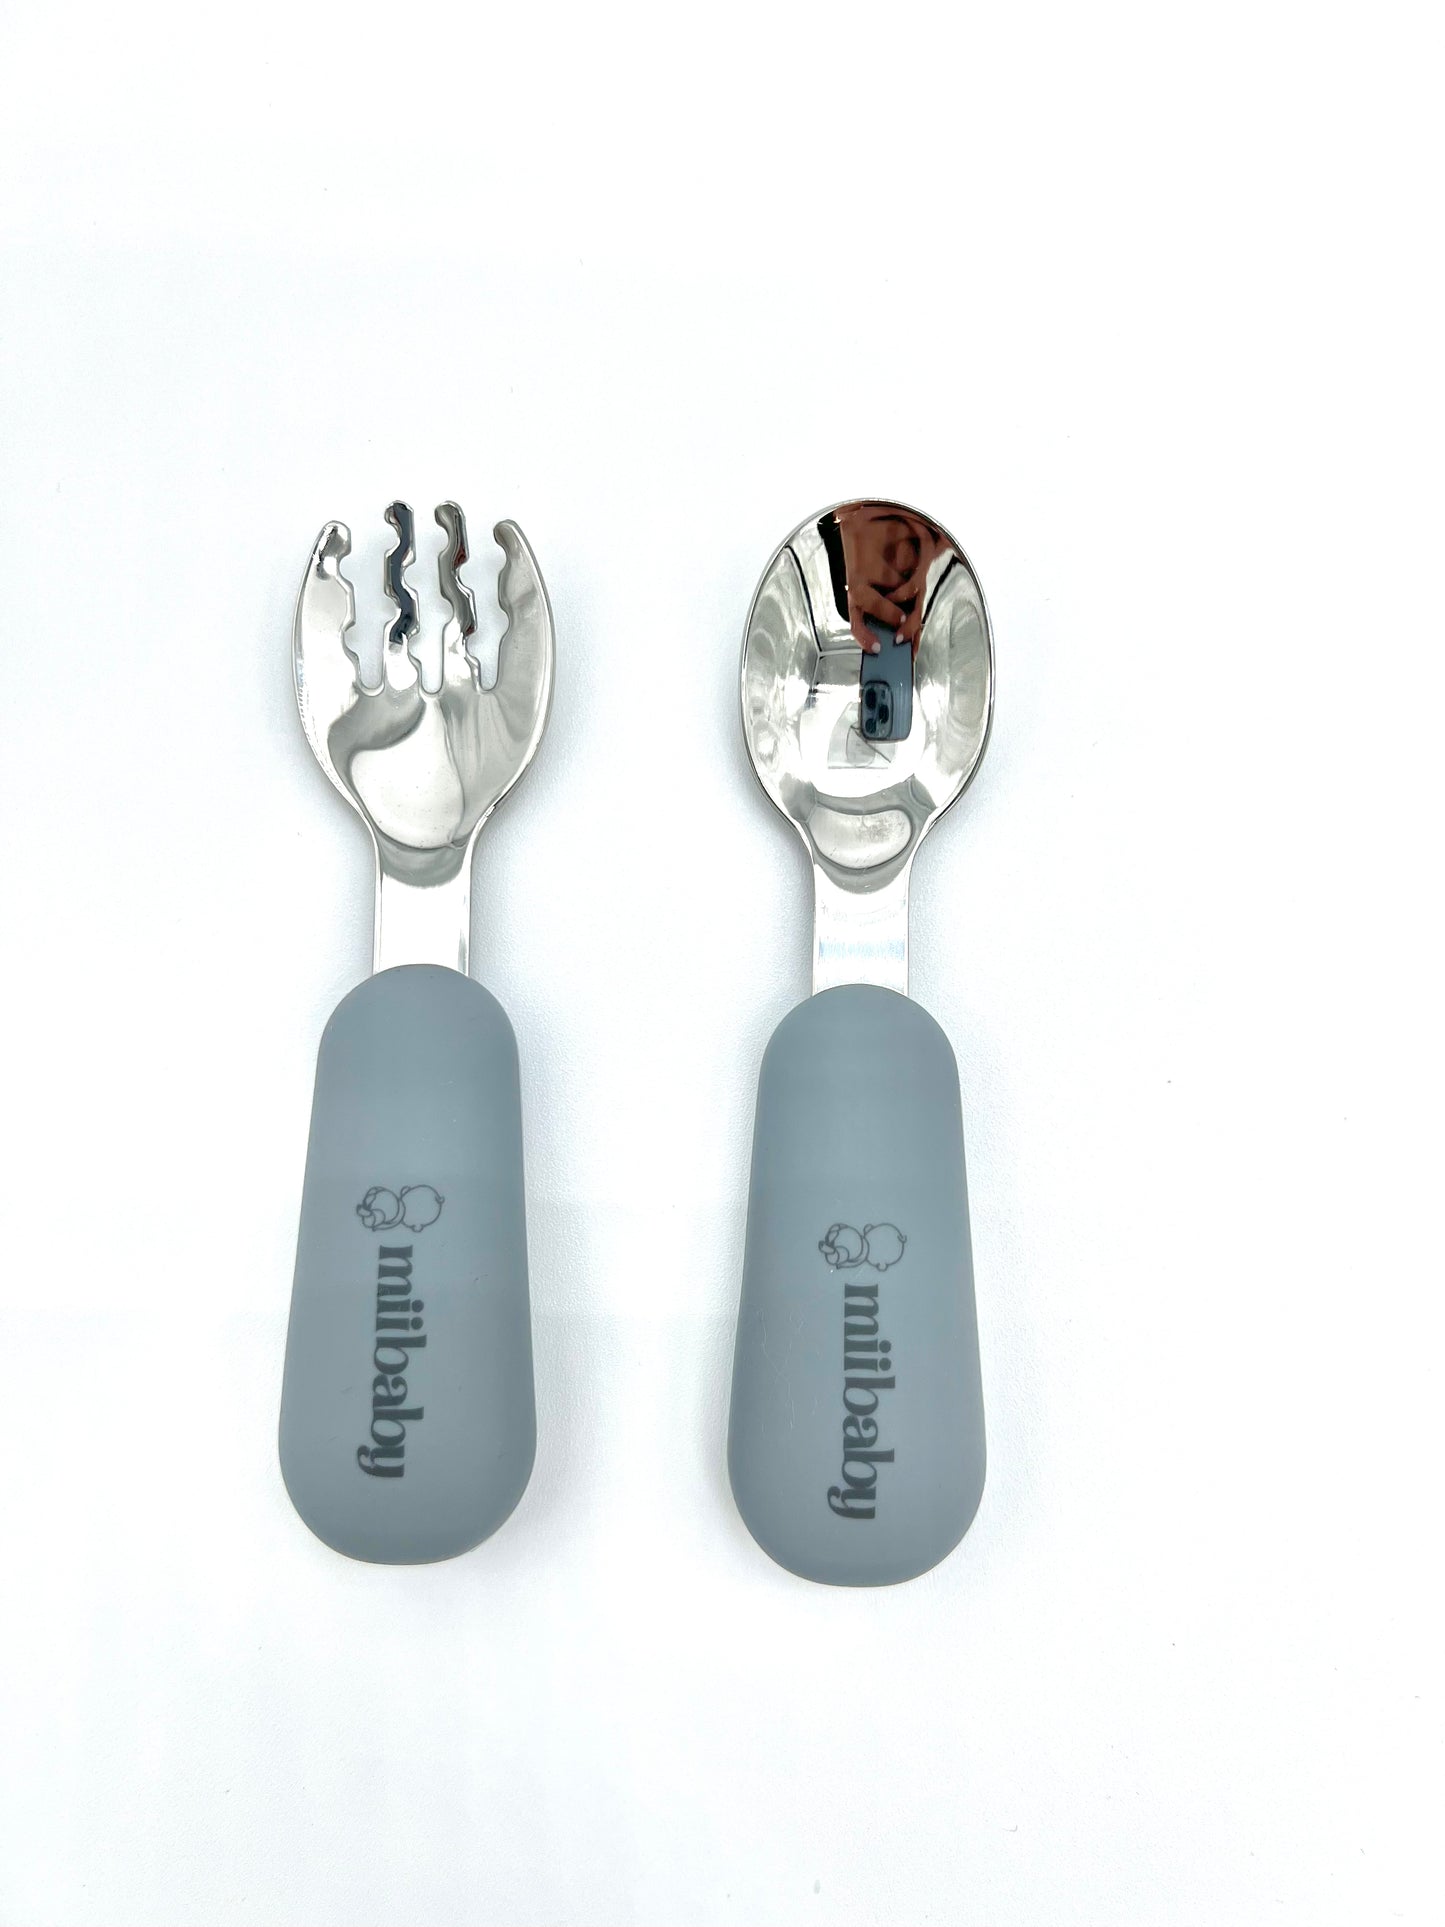 Love is in the Air 6 Pc Weaning Set (Pebble Grey)